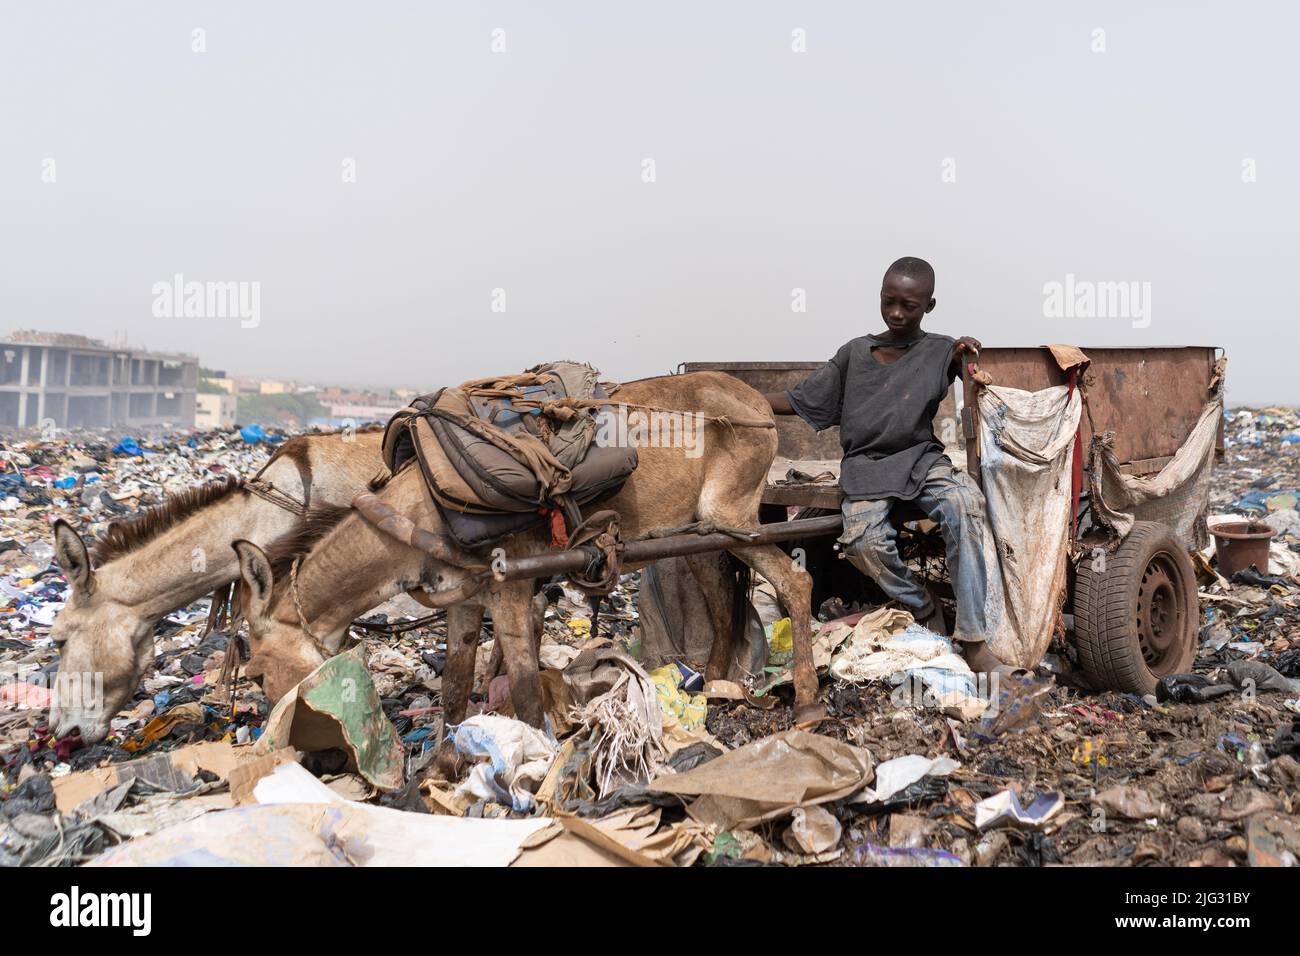 Impoverished street boy earning his living by driving a donkey cart on an urban garbage dumping site Stock Photo